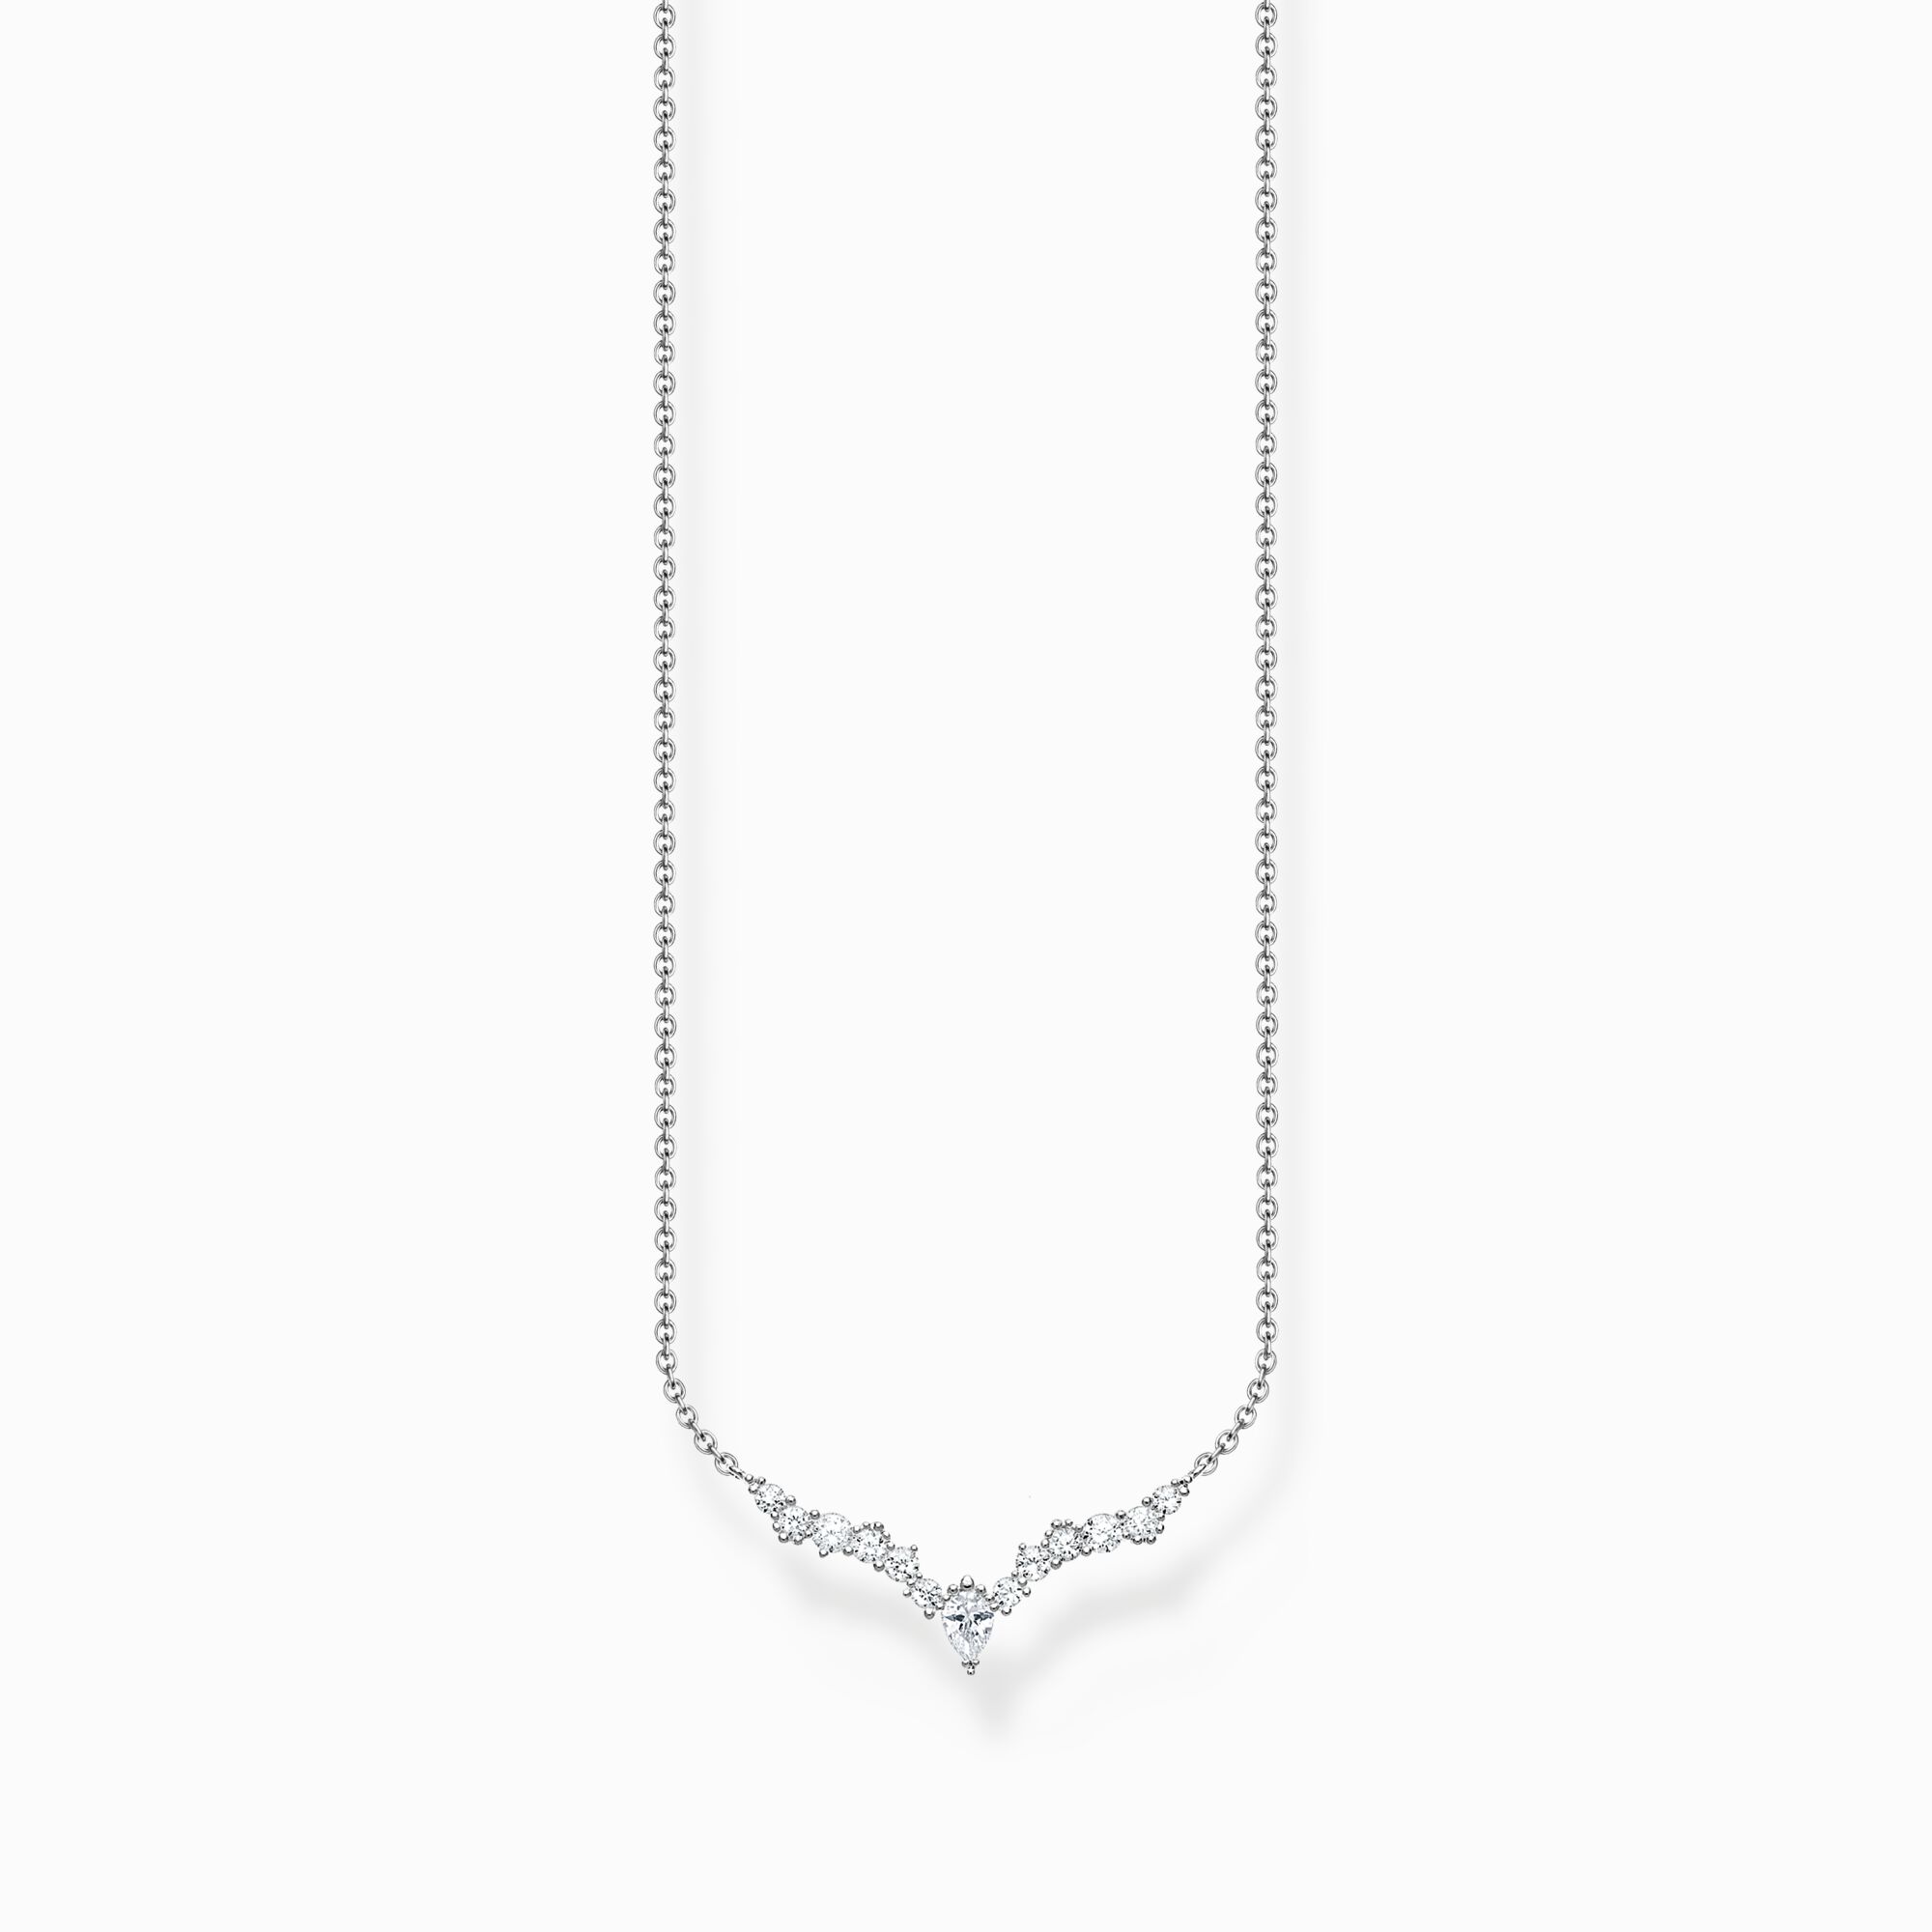 Necklace ice crystals silver from the Charming Collection collection in the THOMAS SABO online store